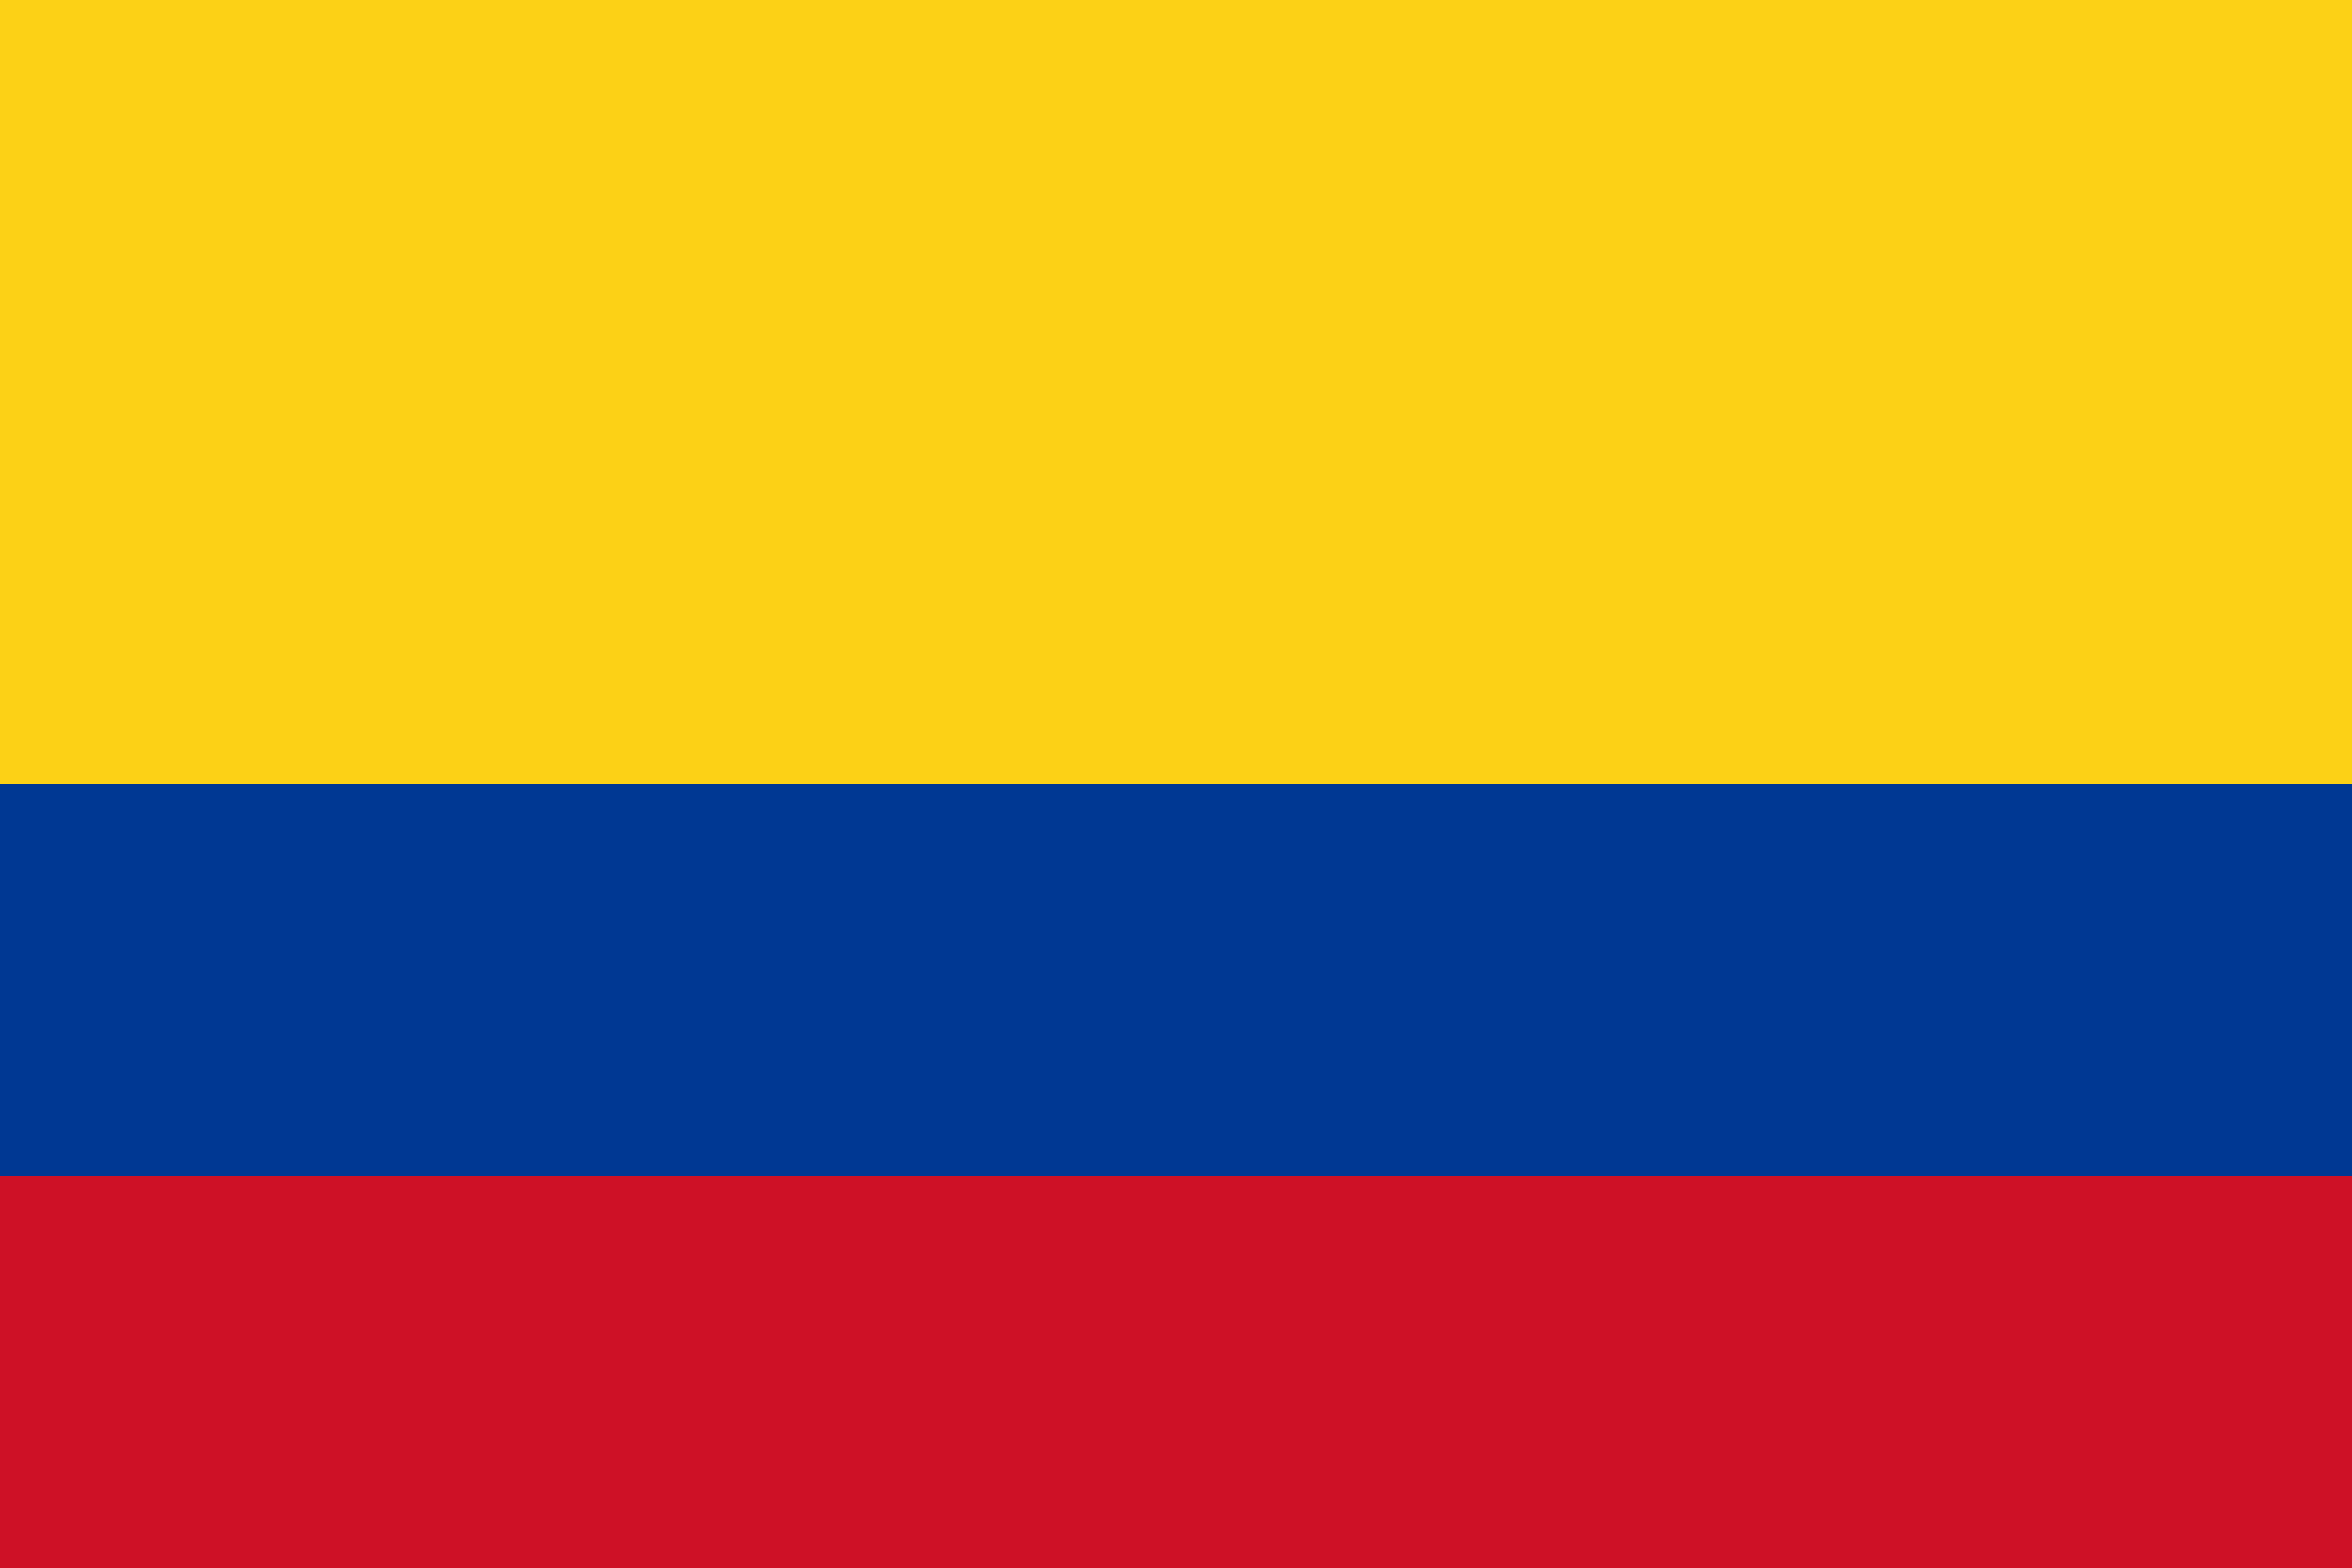 the image shows the colombian flag